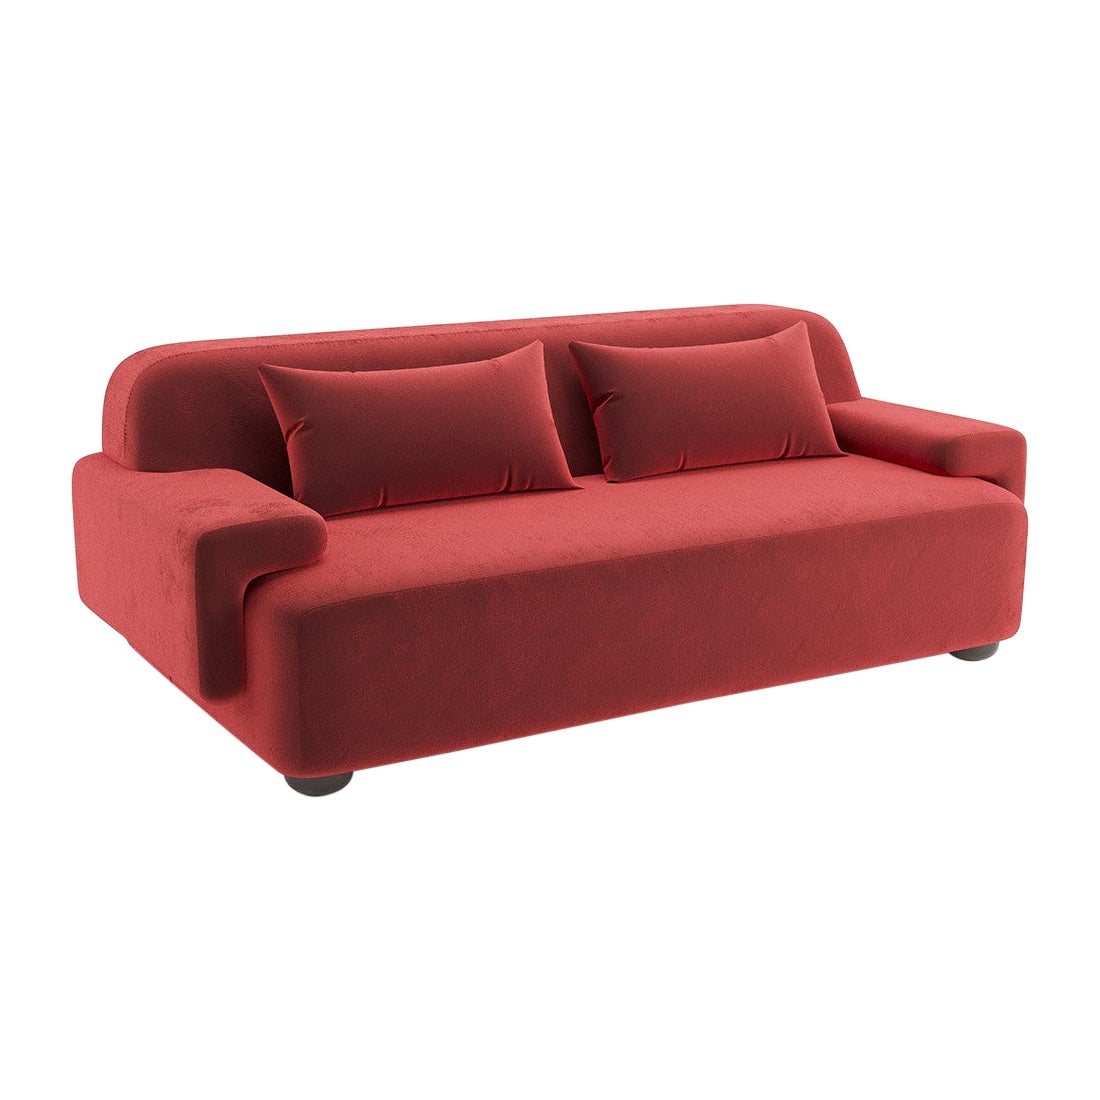 Popus Editions Lena 3 Seater Sofa in Vermilion Como Velvet Upholstery For Sale